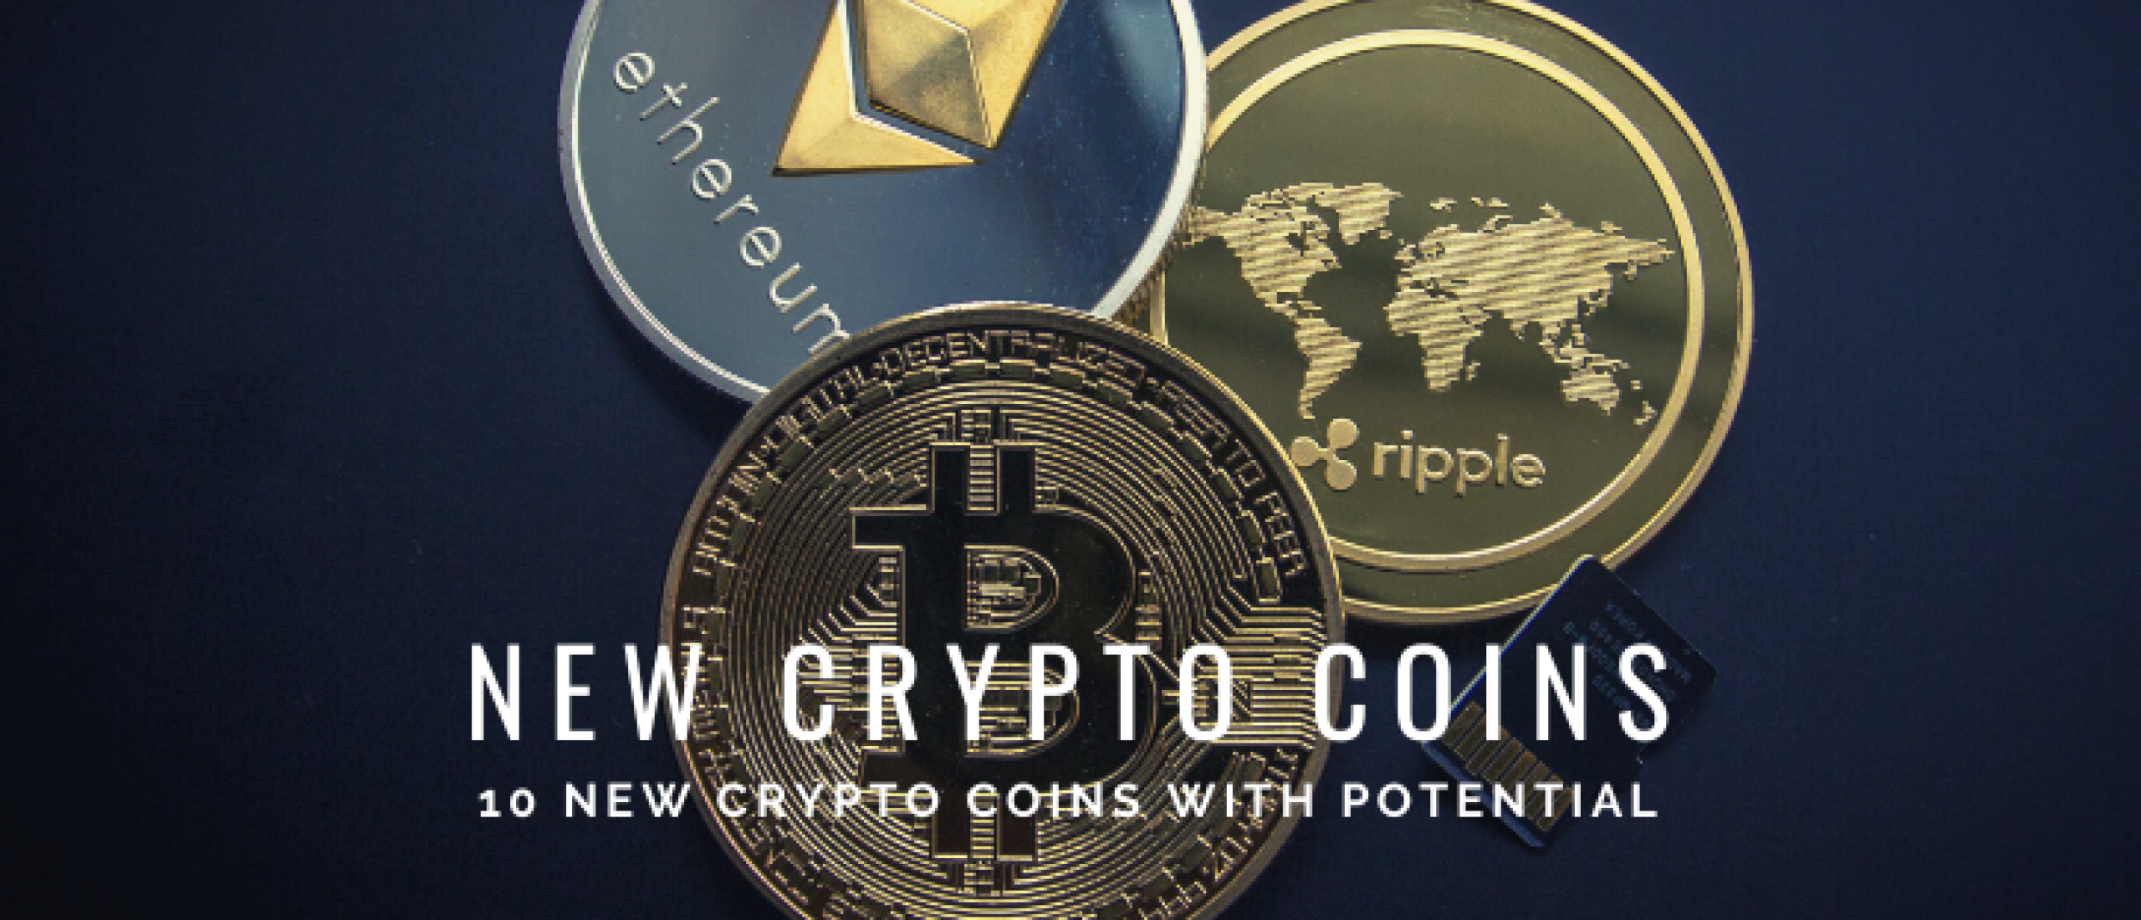 where to find the newest crypto coins